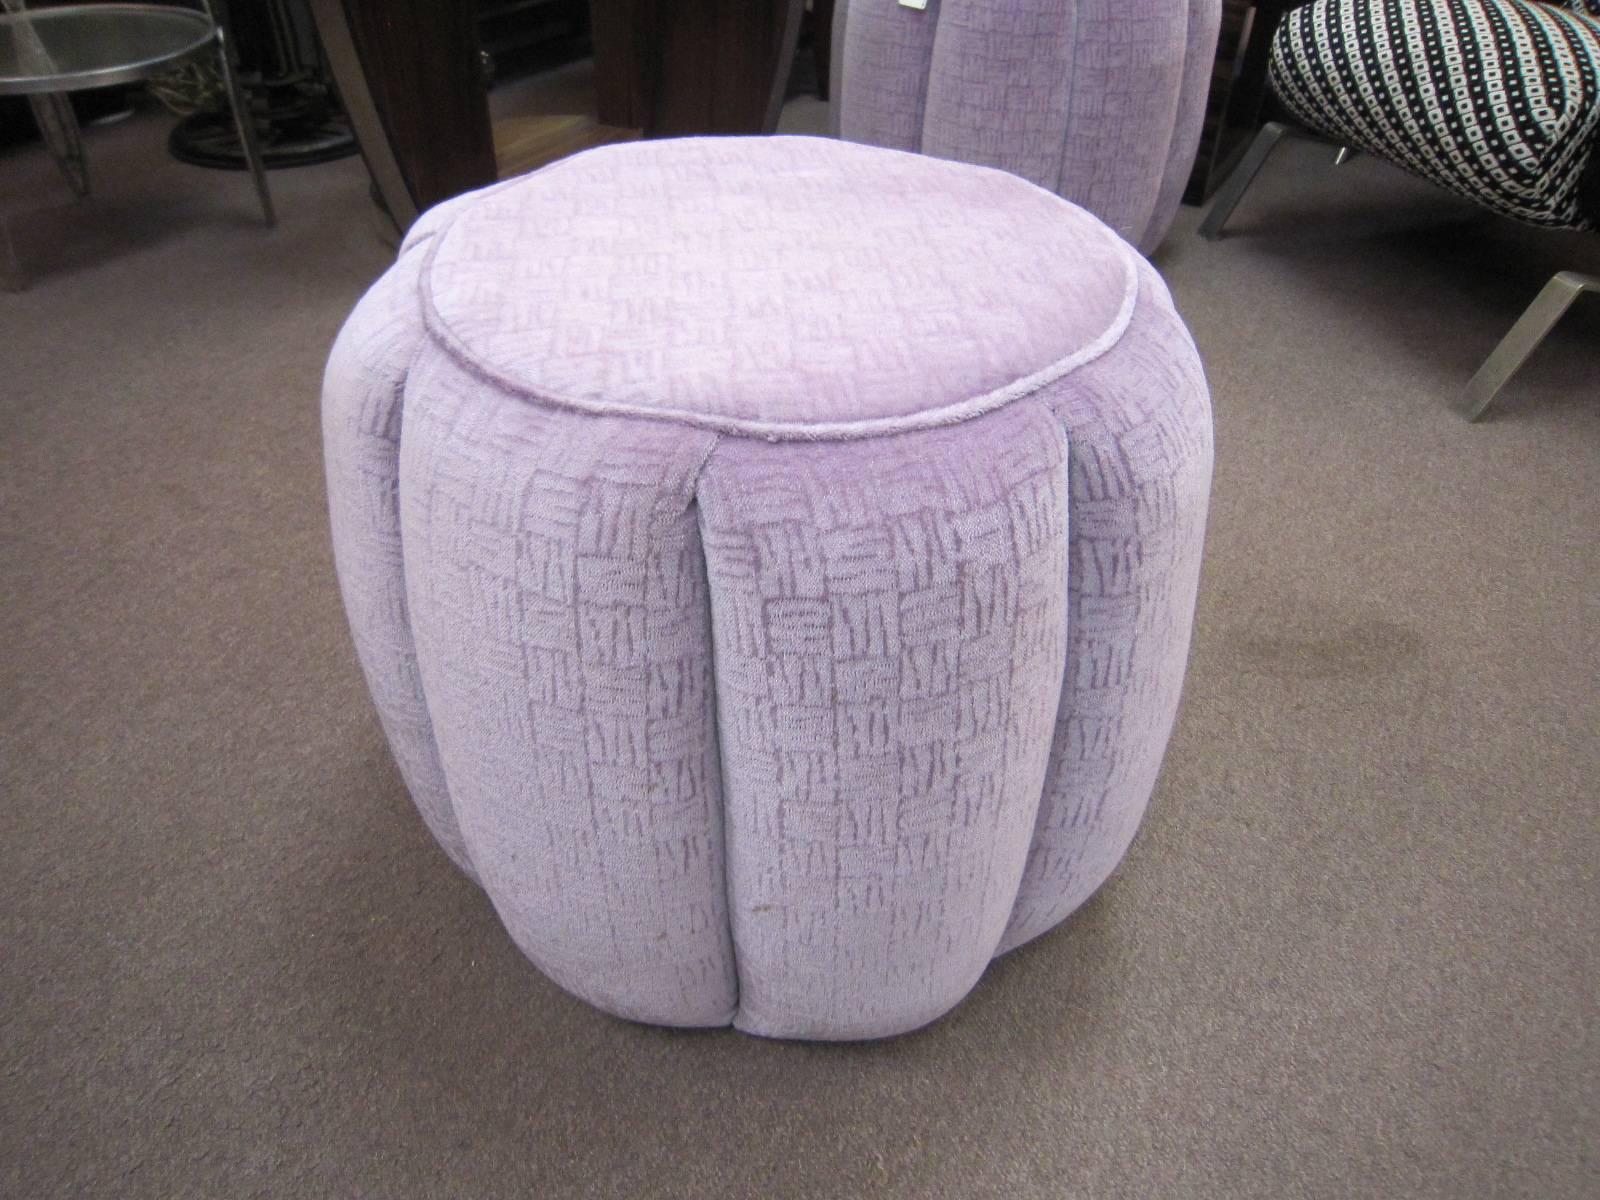 A soft pastel colored lilac, lavender, light purple, pink mohair upholstered Modernist pouf or seat.  
The soft velvety opulent fabric almost reminiscent of short fur with beautifully tufted and scalloped sides, has an overall minimalist geometric